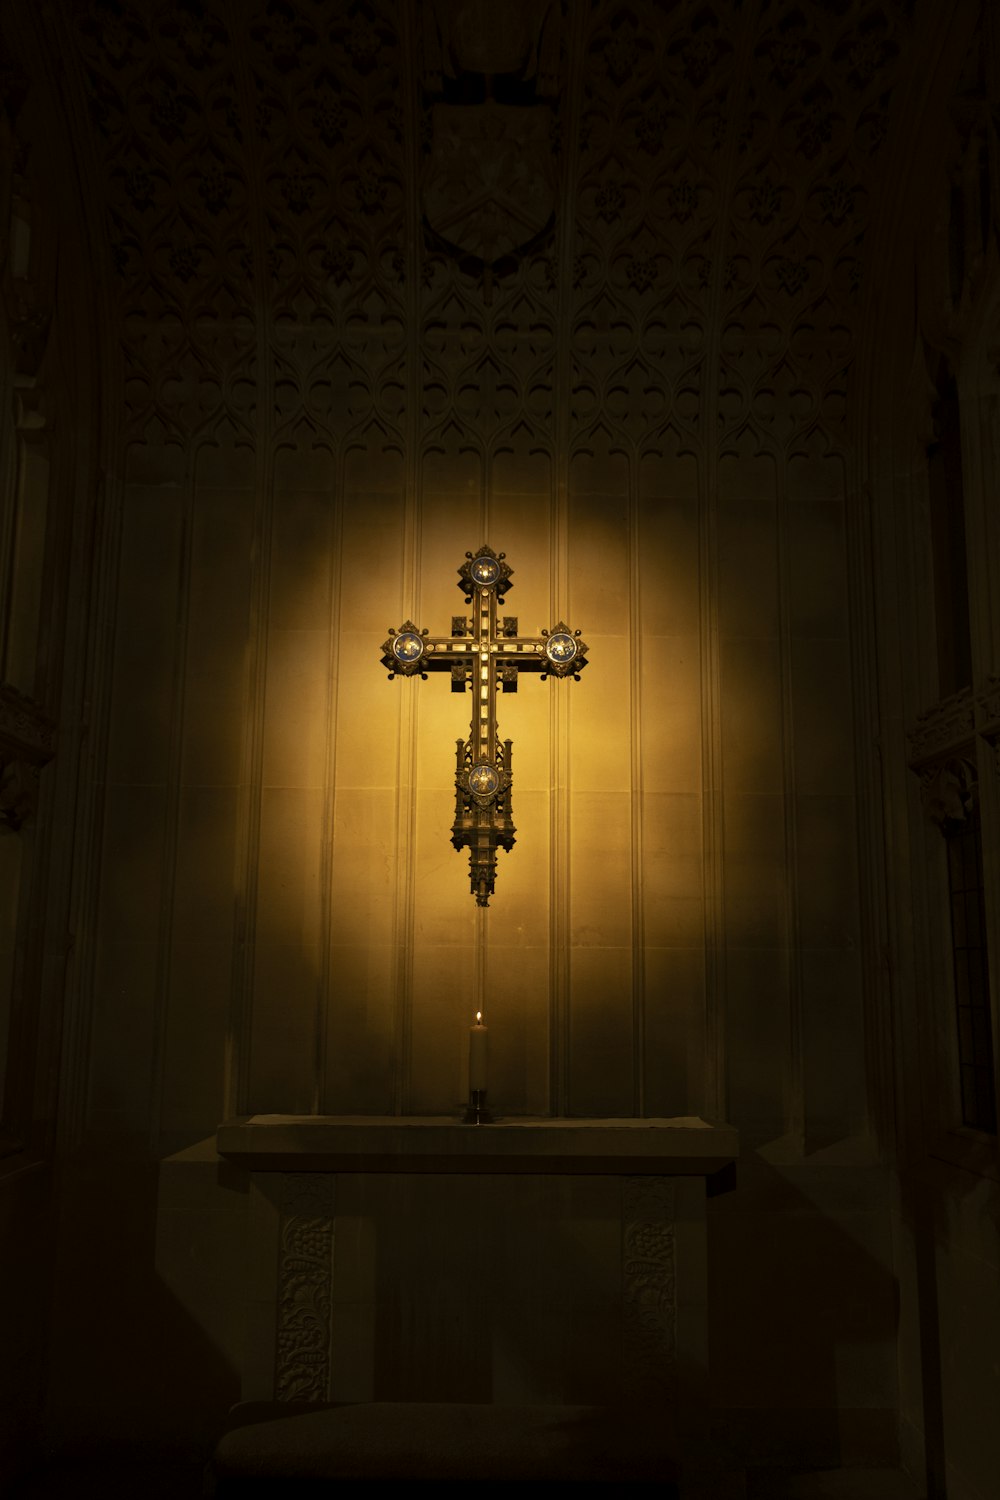 a cross on a table in a dimly lit room